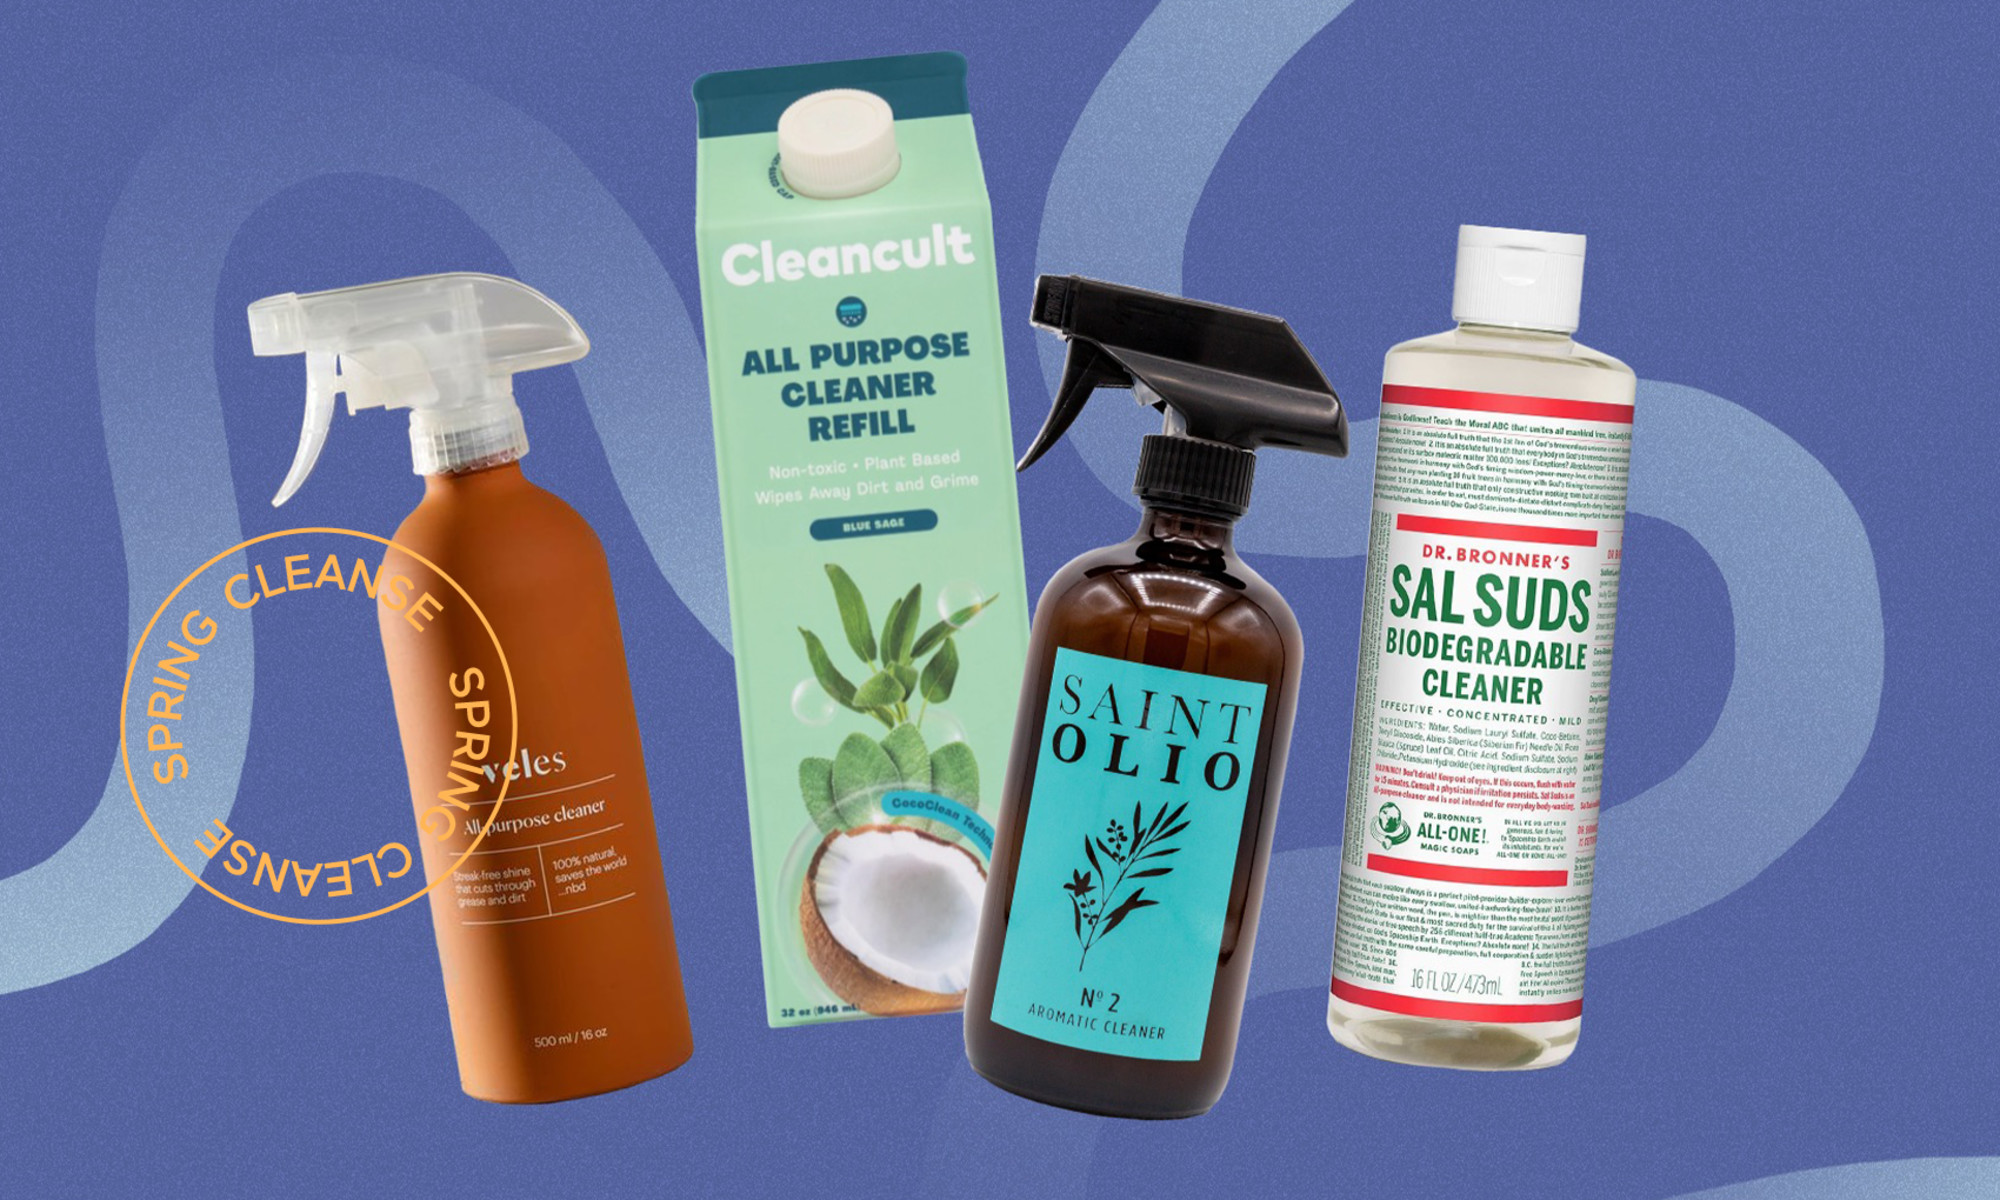 The 15 Best Natural Cleaning Products for Your Home